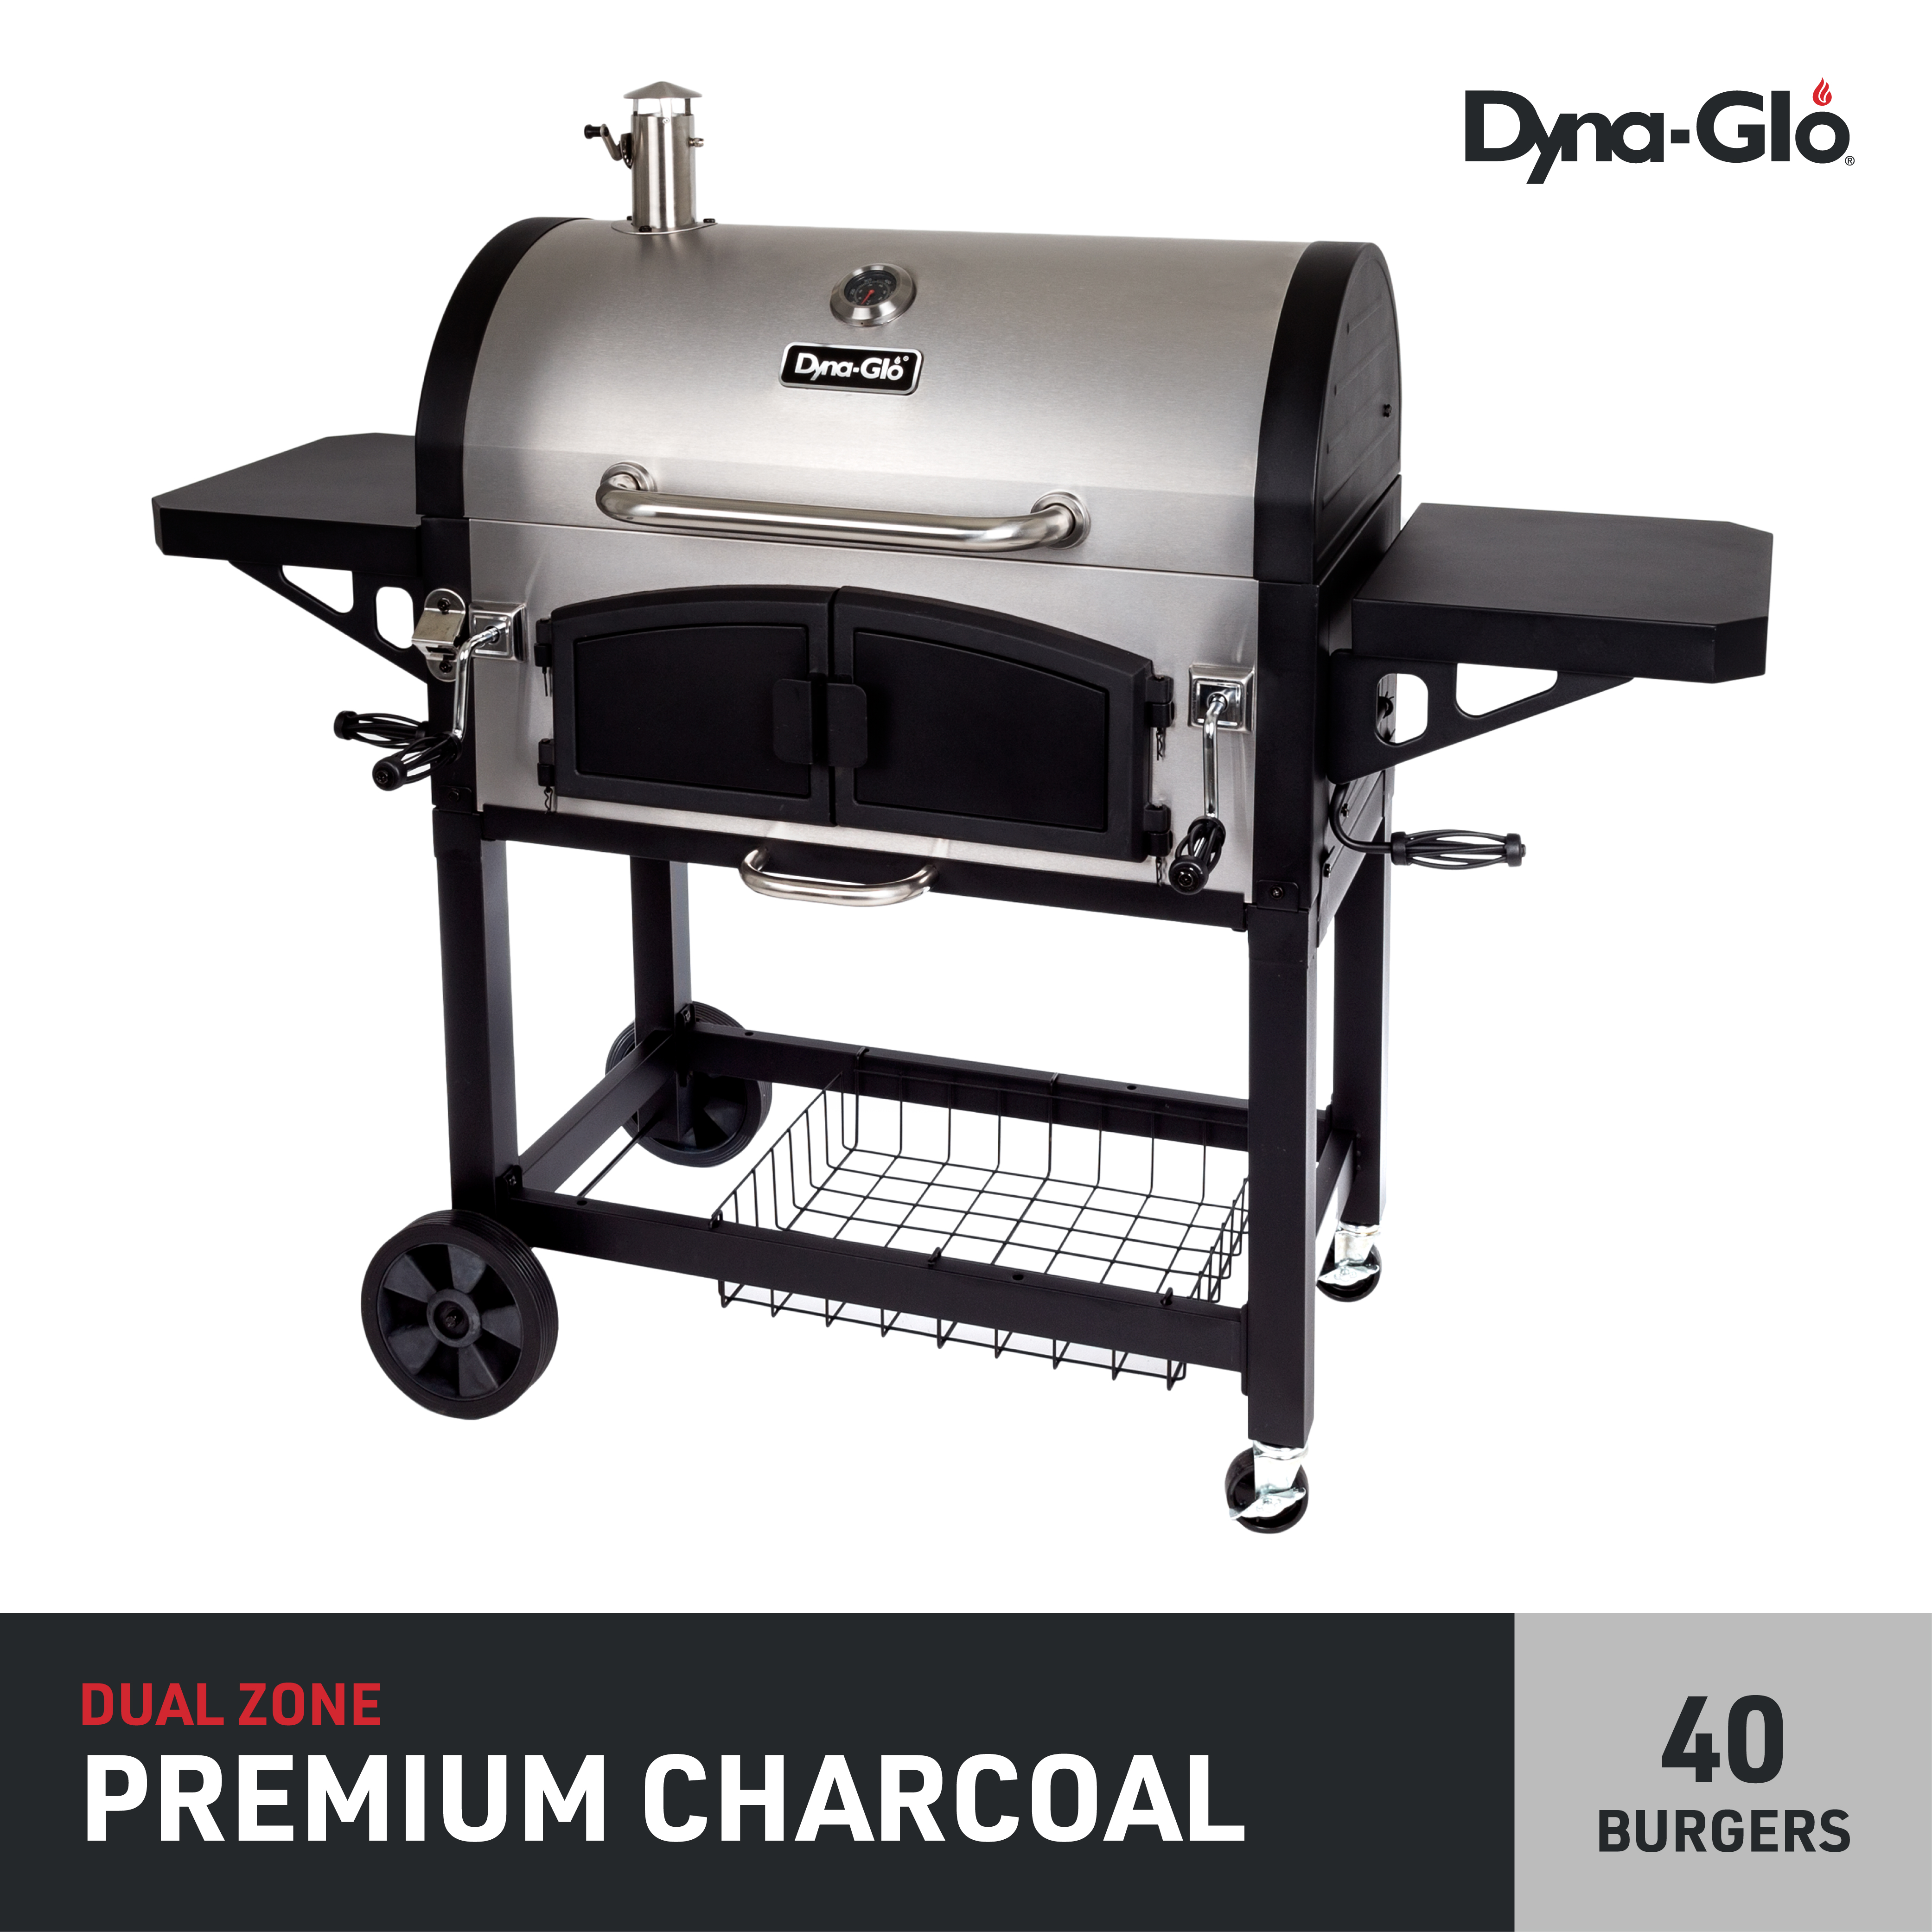 Dyna-Glo DGN576SNC-D Dual Chamber Stainless Steel Charcoal BBQ Grill - image 1 of 12